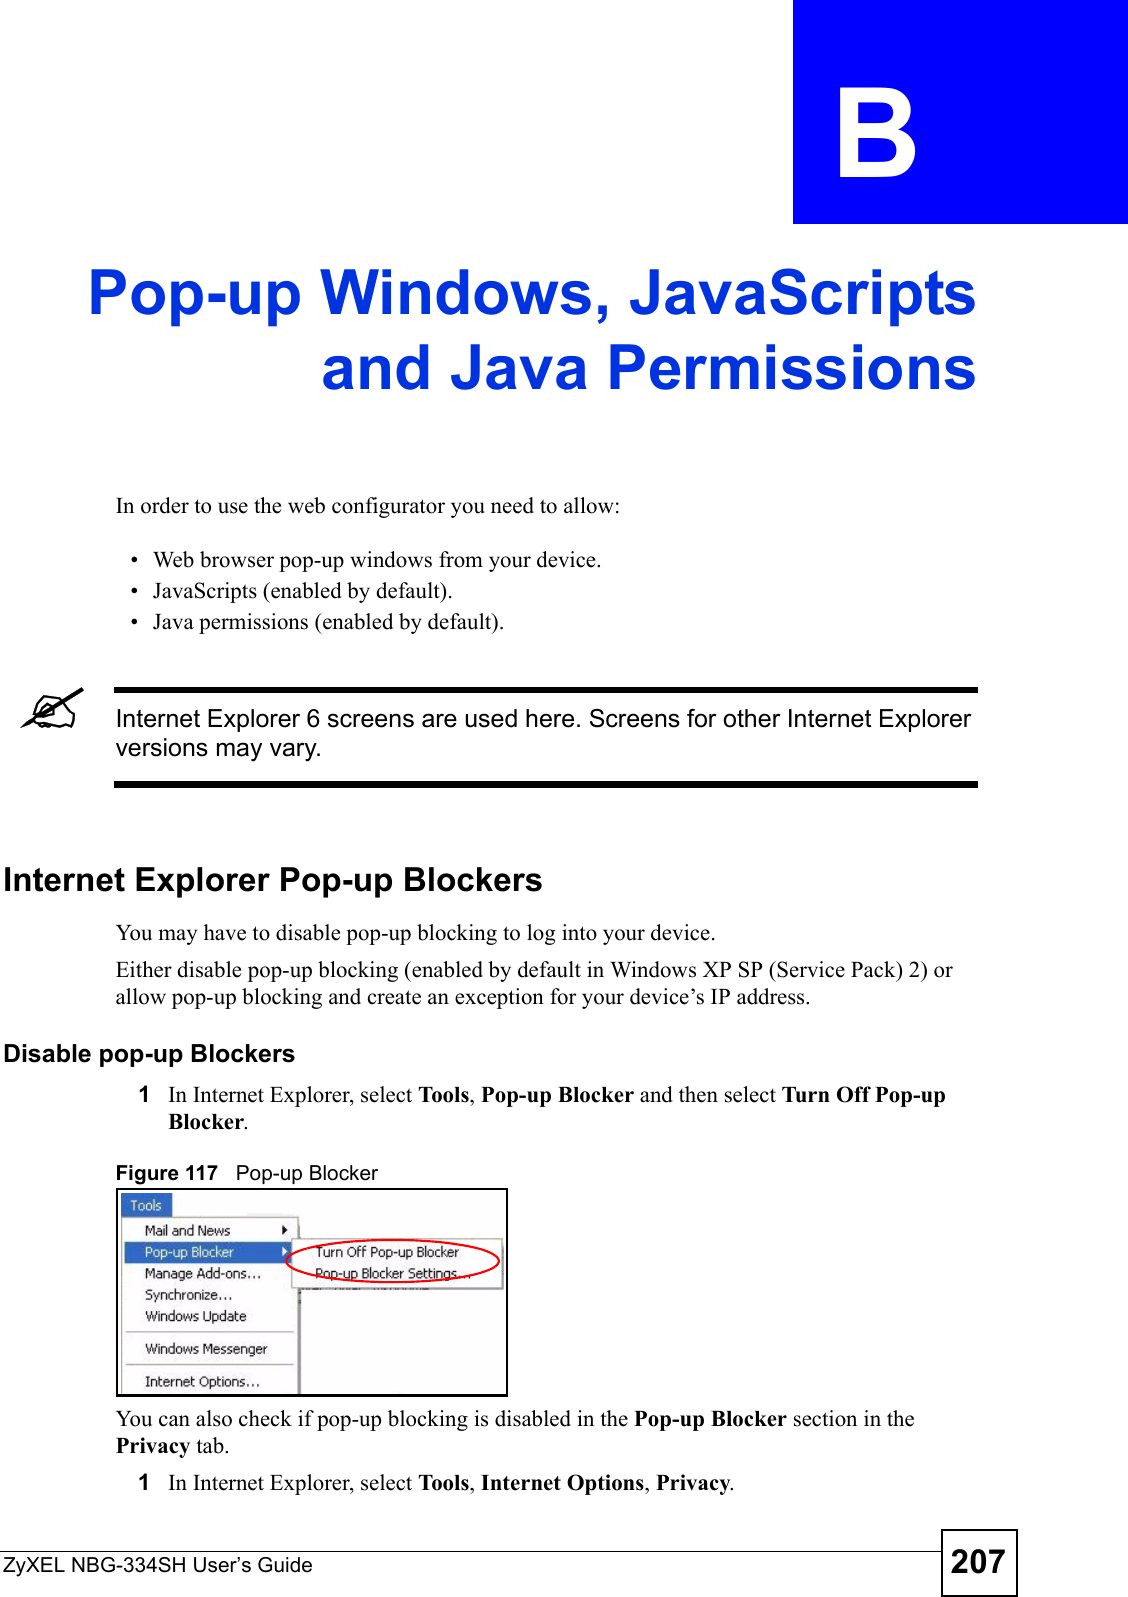 ZyXEL NBG-334SH User’s Guide 207APPENDIX  B Pop-up Windows, JavaScriptsand Java PermissionsIn order to use the web configurator you need to allow:• Web browser pop-up windows from your device.• JavaScripts (enabled by default).• Java permissions (enabled by default).&quot;Internet Explorer 6 screens are used here. Screens for other Internet Explorer versions may vary.Internet Explorer Pop-up BlockersYou may have to disable pop-up blocking to log into your device. Either disable pop-up blocking (enabled by default in Windows XP SP (Service Pack) 2) or allow pop-up blocking and create an exception for your device’s IP address.Disable pop-up Blockers1In Internet Explorer, select To ols, Pop-up Blocker and then select Turn Off Pop-up Blocker. Figure 117   Pop-up BlockerYou can also check if pop-up blocking is disabled in the Pop-up Blocker section in the Privacy tab. 1In Internet Explorer, select To ol s, Internet Options, Privacy.